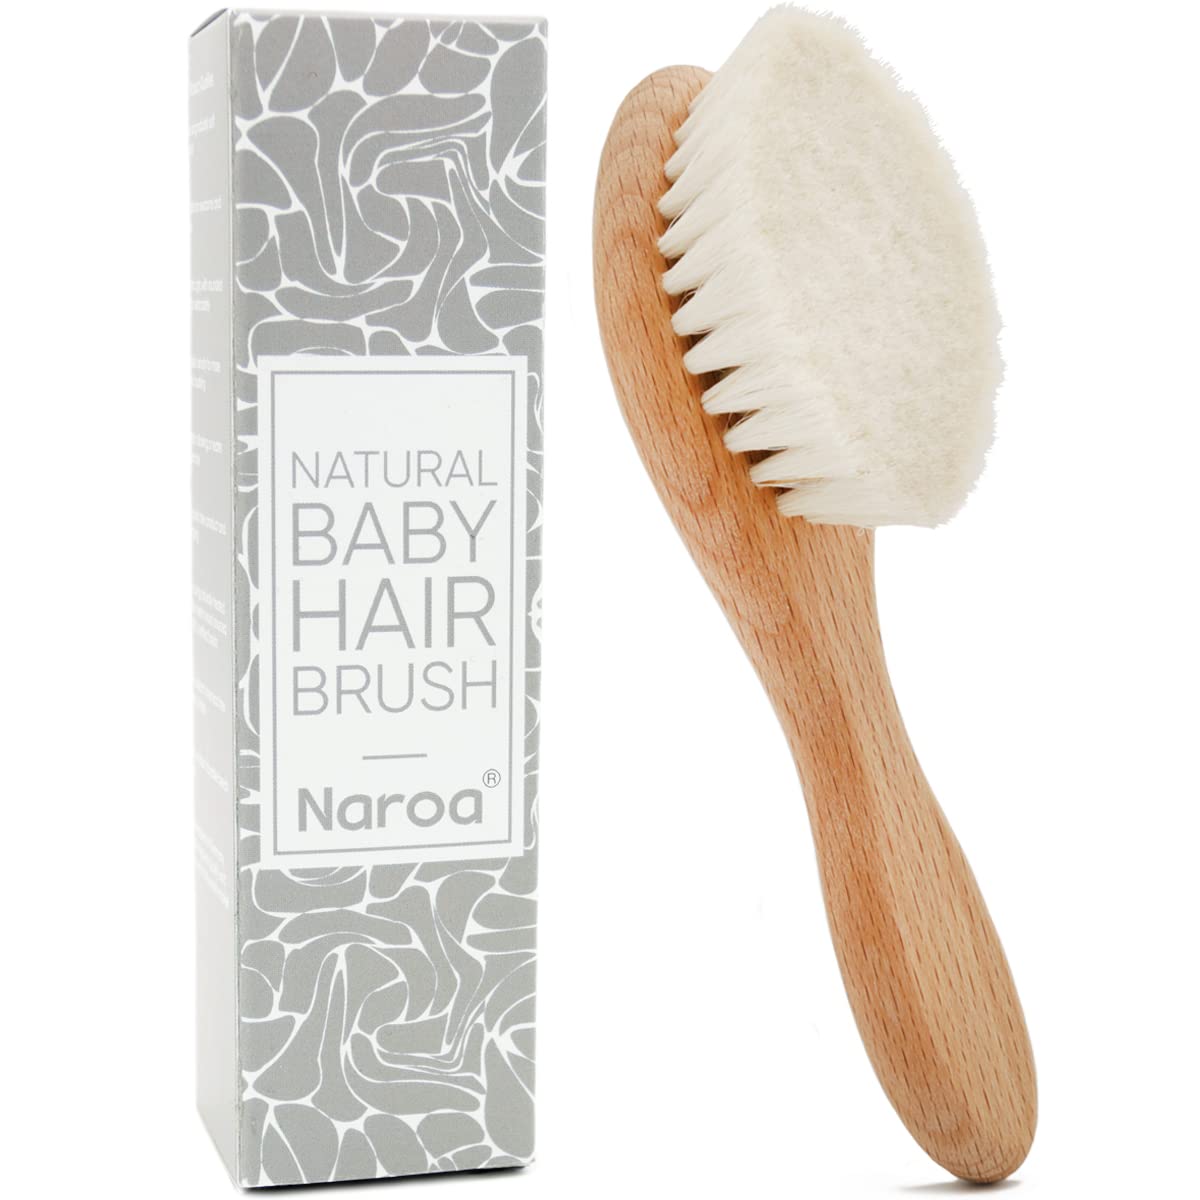 Naroa ® Soft Natural Baby Hair Brush | Eco-Friendly Safe Wooden Handle & Smooth Goat Bristles for Newborns Toddlers | Wood Hairbrush for Scalp Health Prevent Cradle Cap | Girl Boy Baby Gift Registry